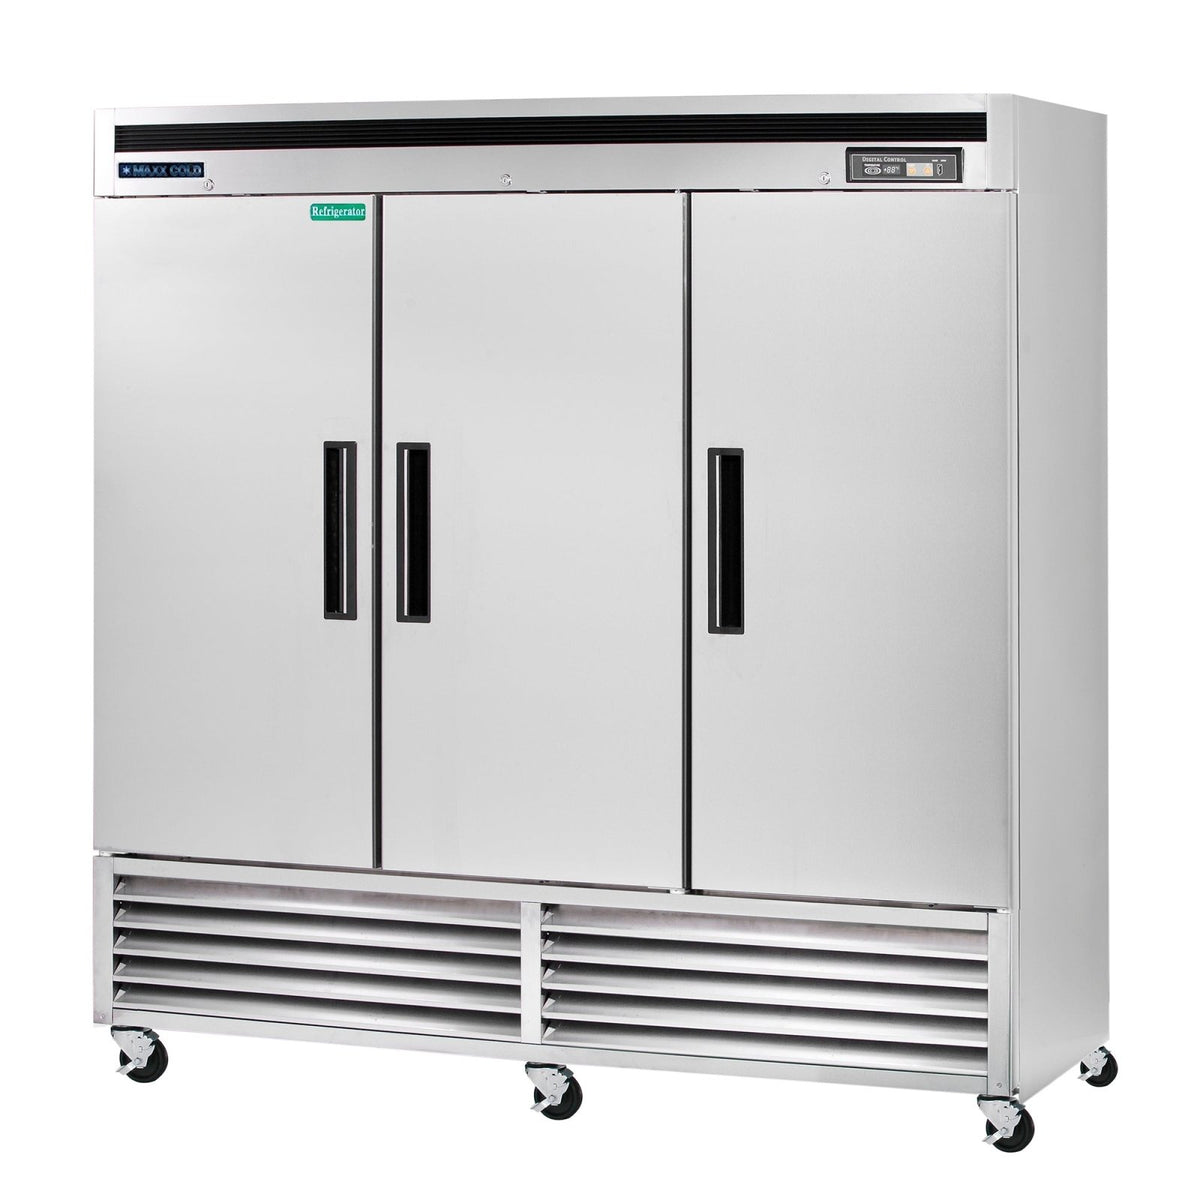 Maxx Cold MCR - 72FDHC Triple Door Reach - In Refrigerator, Bottom Mount, 81"W, 66.7 cu. ft. Storage Capacity, in Stainless Steel - TheChefStore.Com